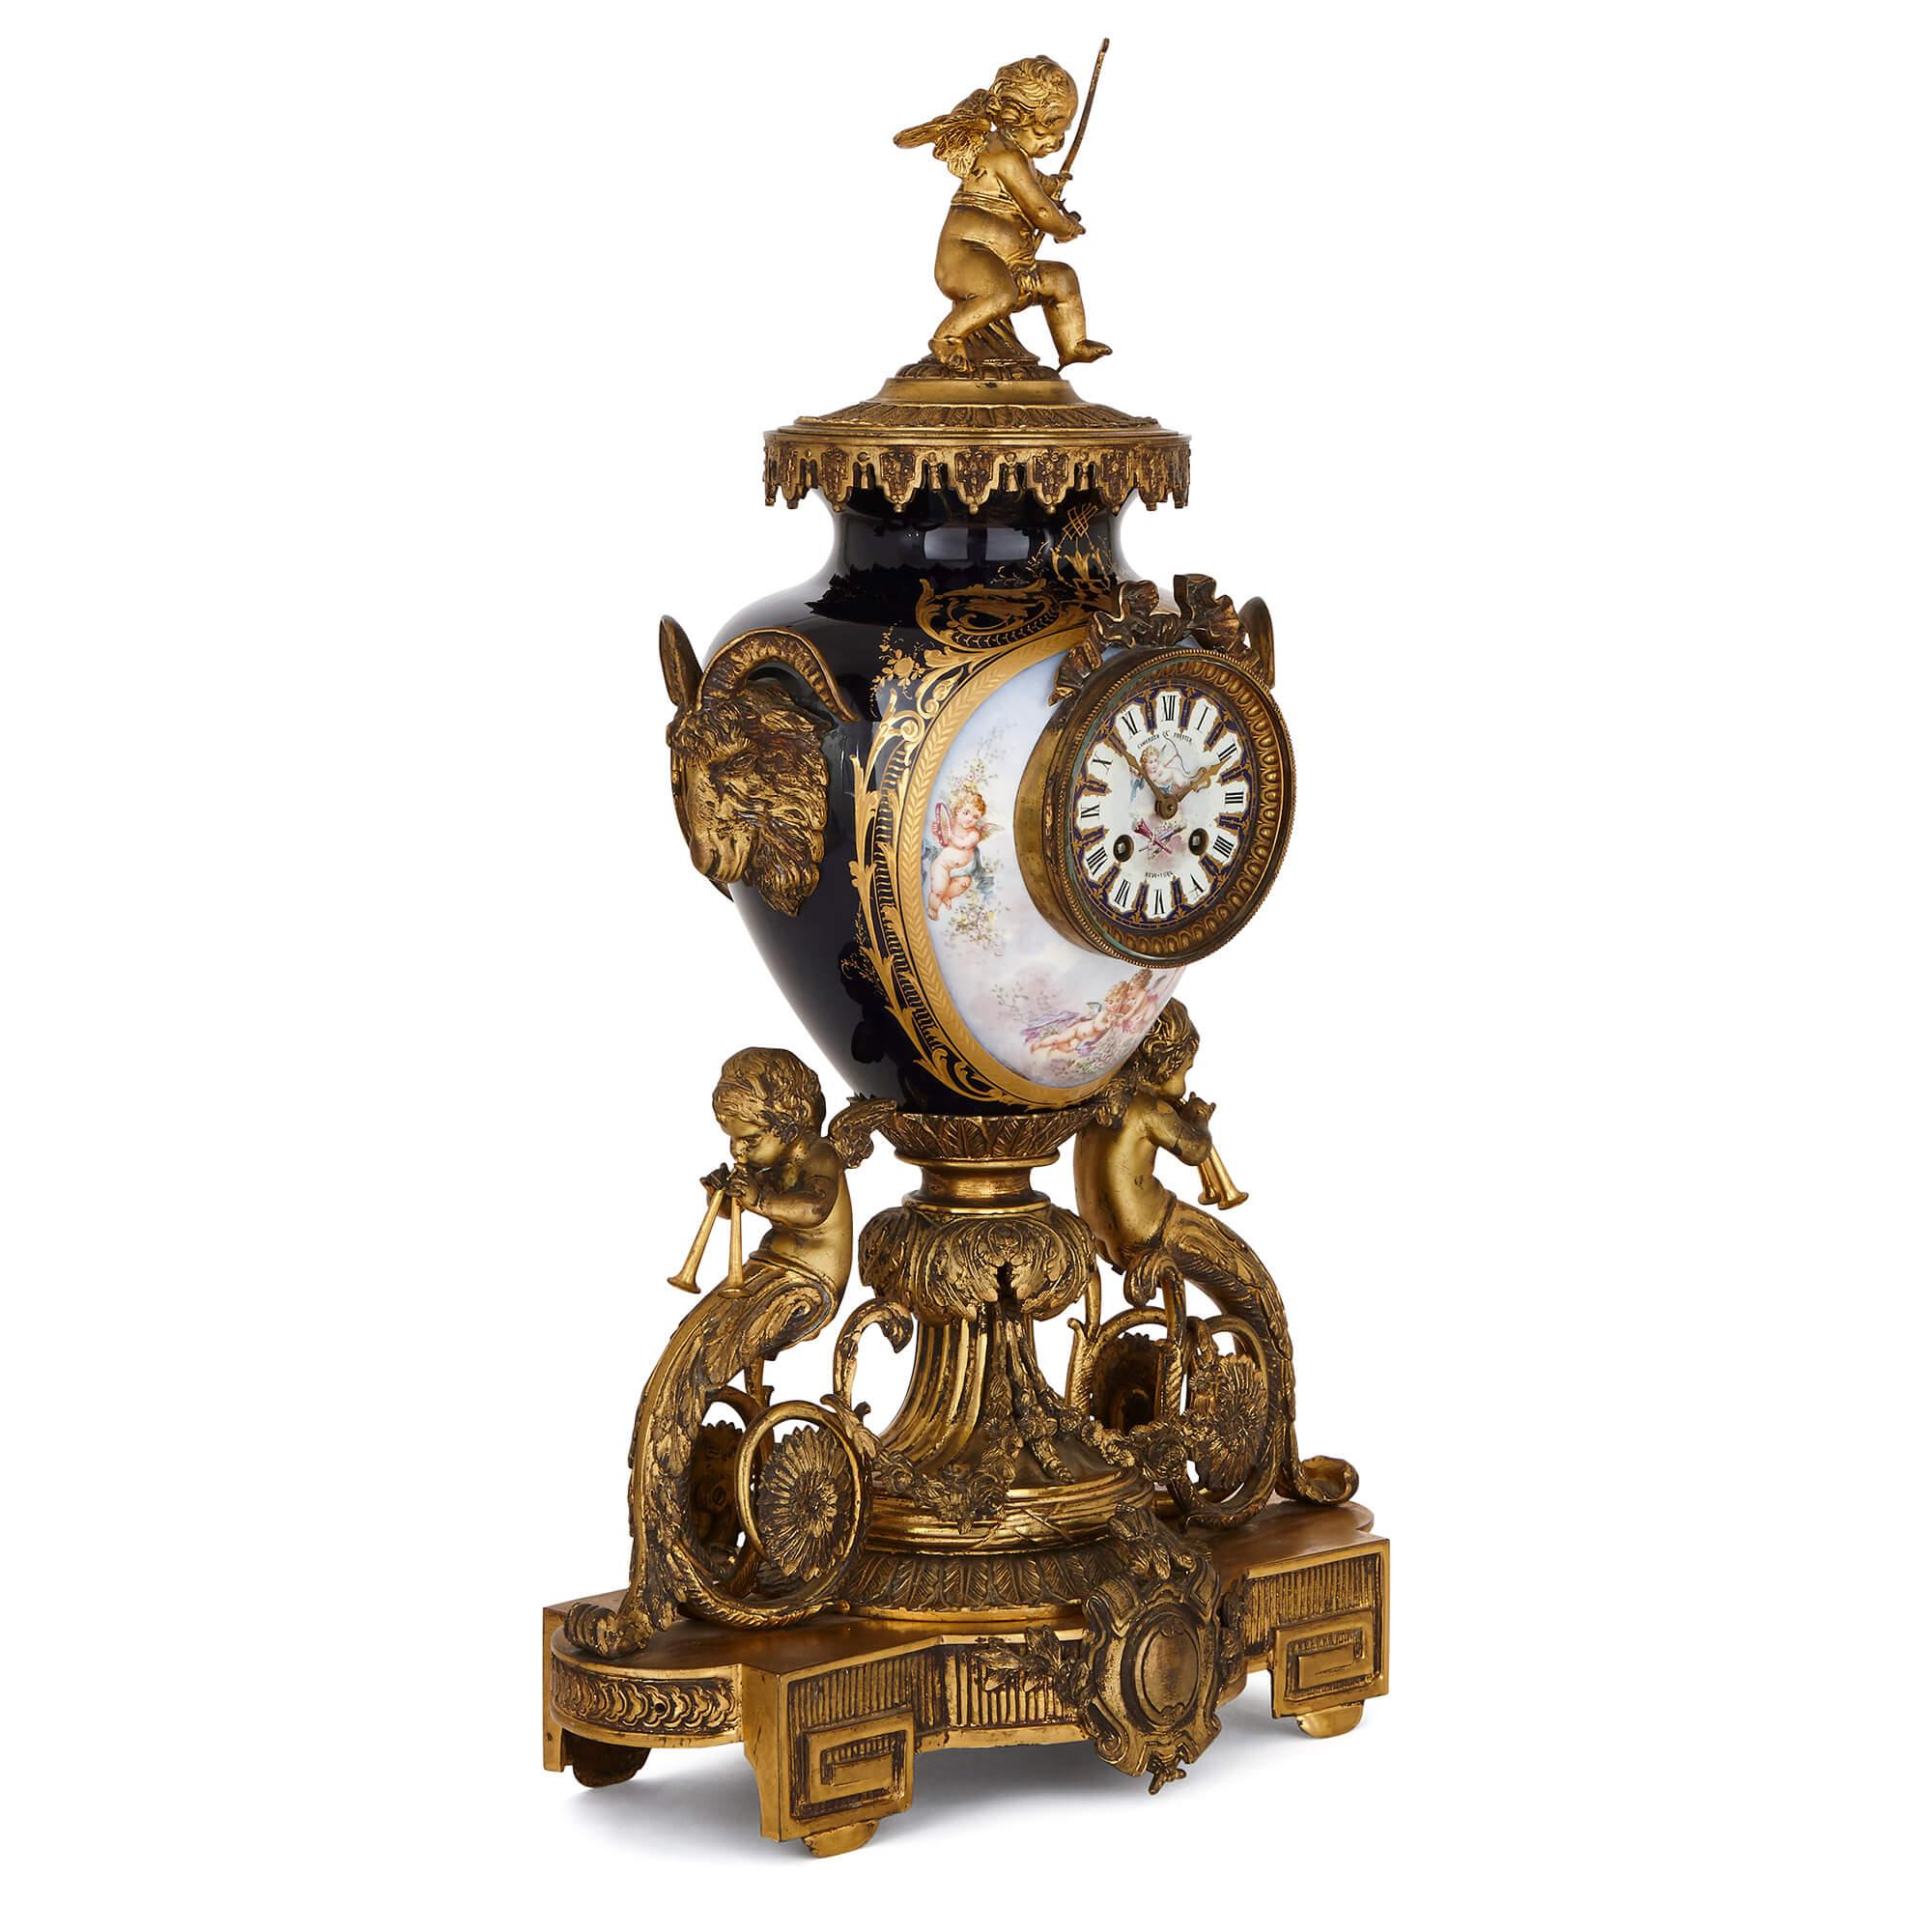 This large and impressive clock garniture set consists of a central clock and a pair of flanking vases. The three pieces are extremely finely decorated with painted cartouches of flying putti, fetes galantes, and floral motifs, on a Sèvres